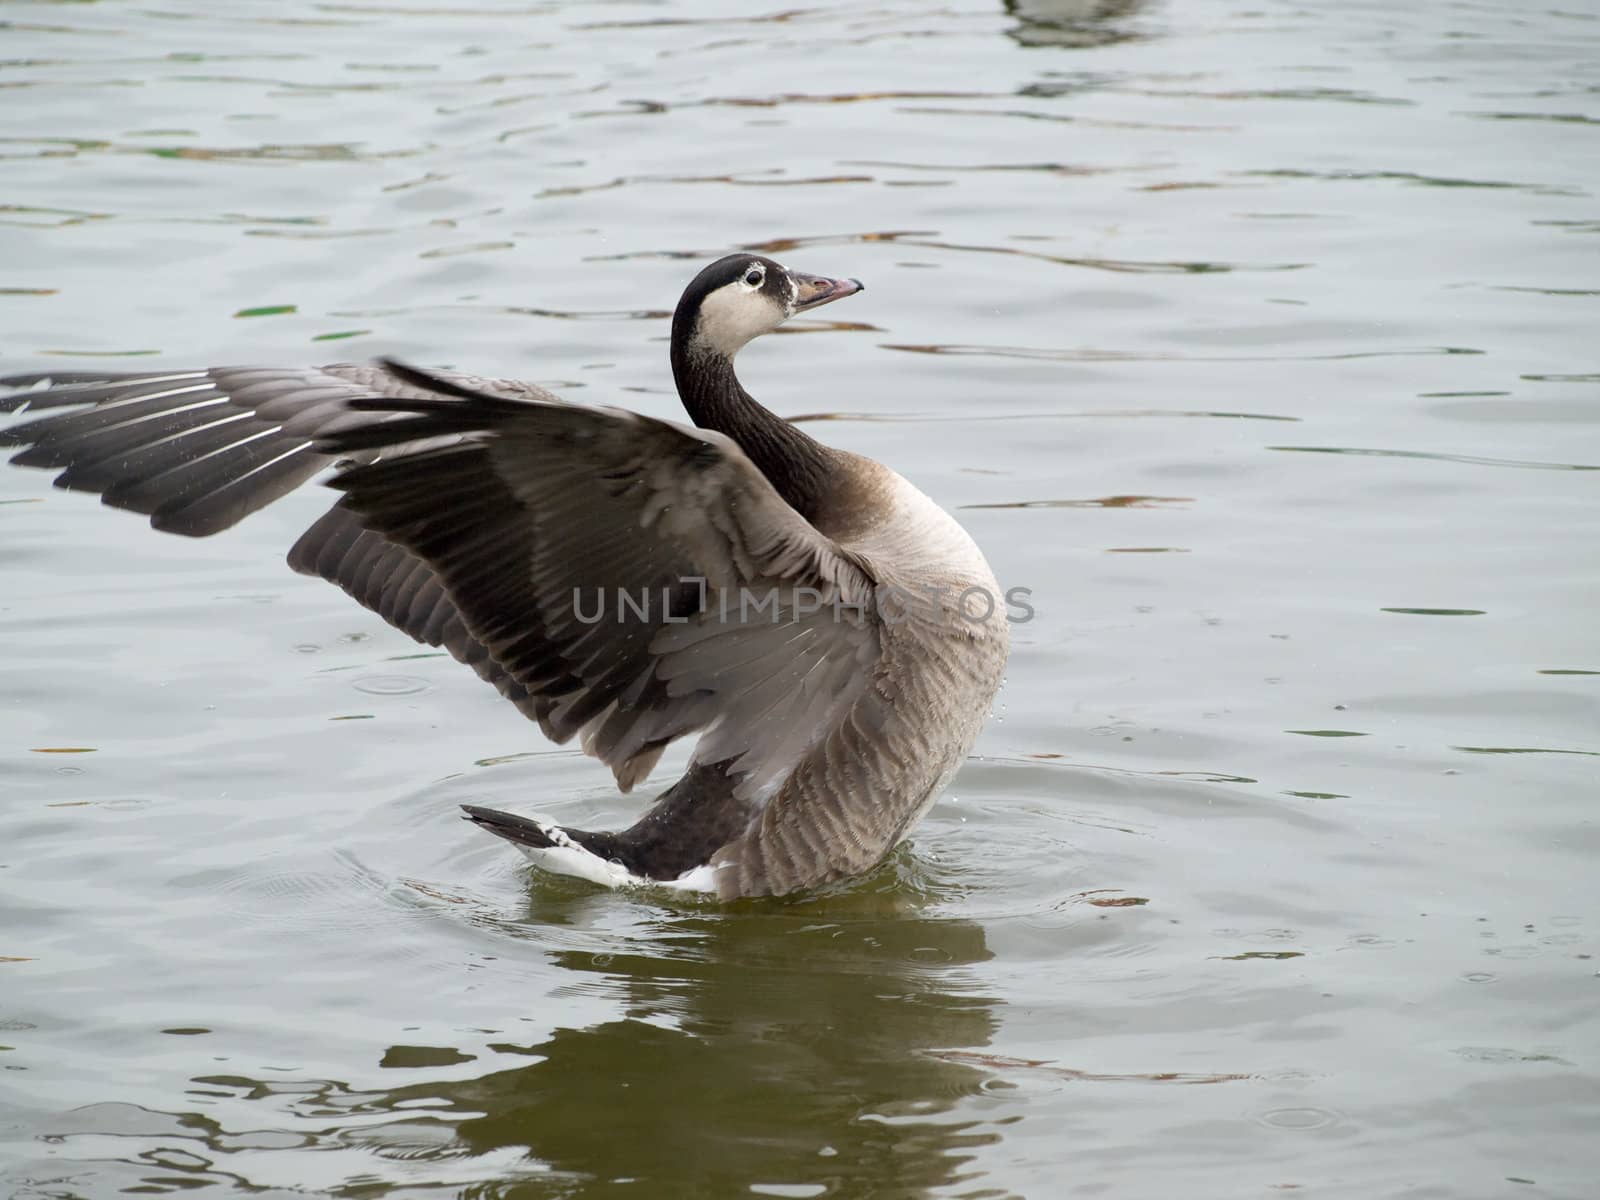 A Goose on water with reflection flapping its wings